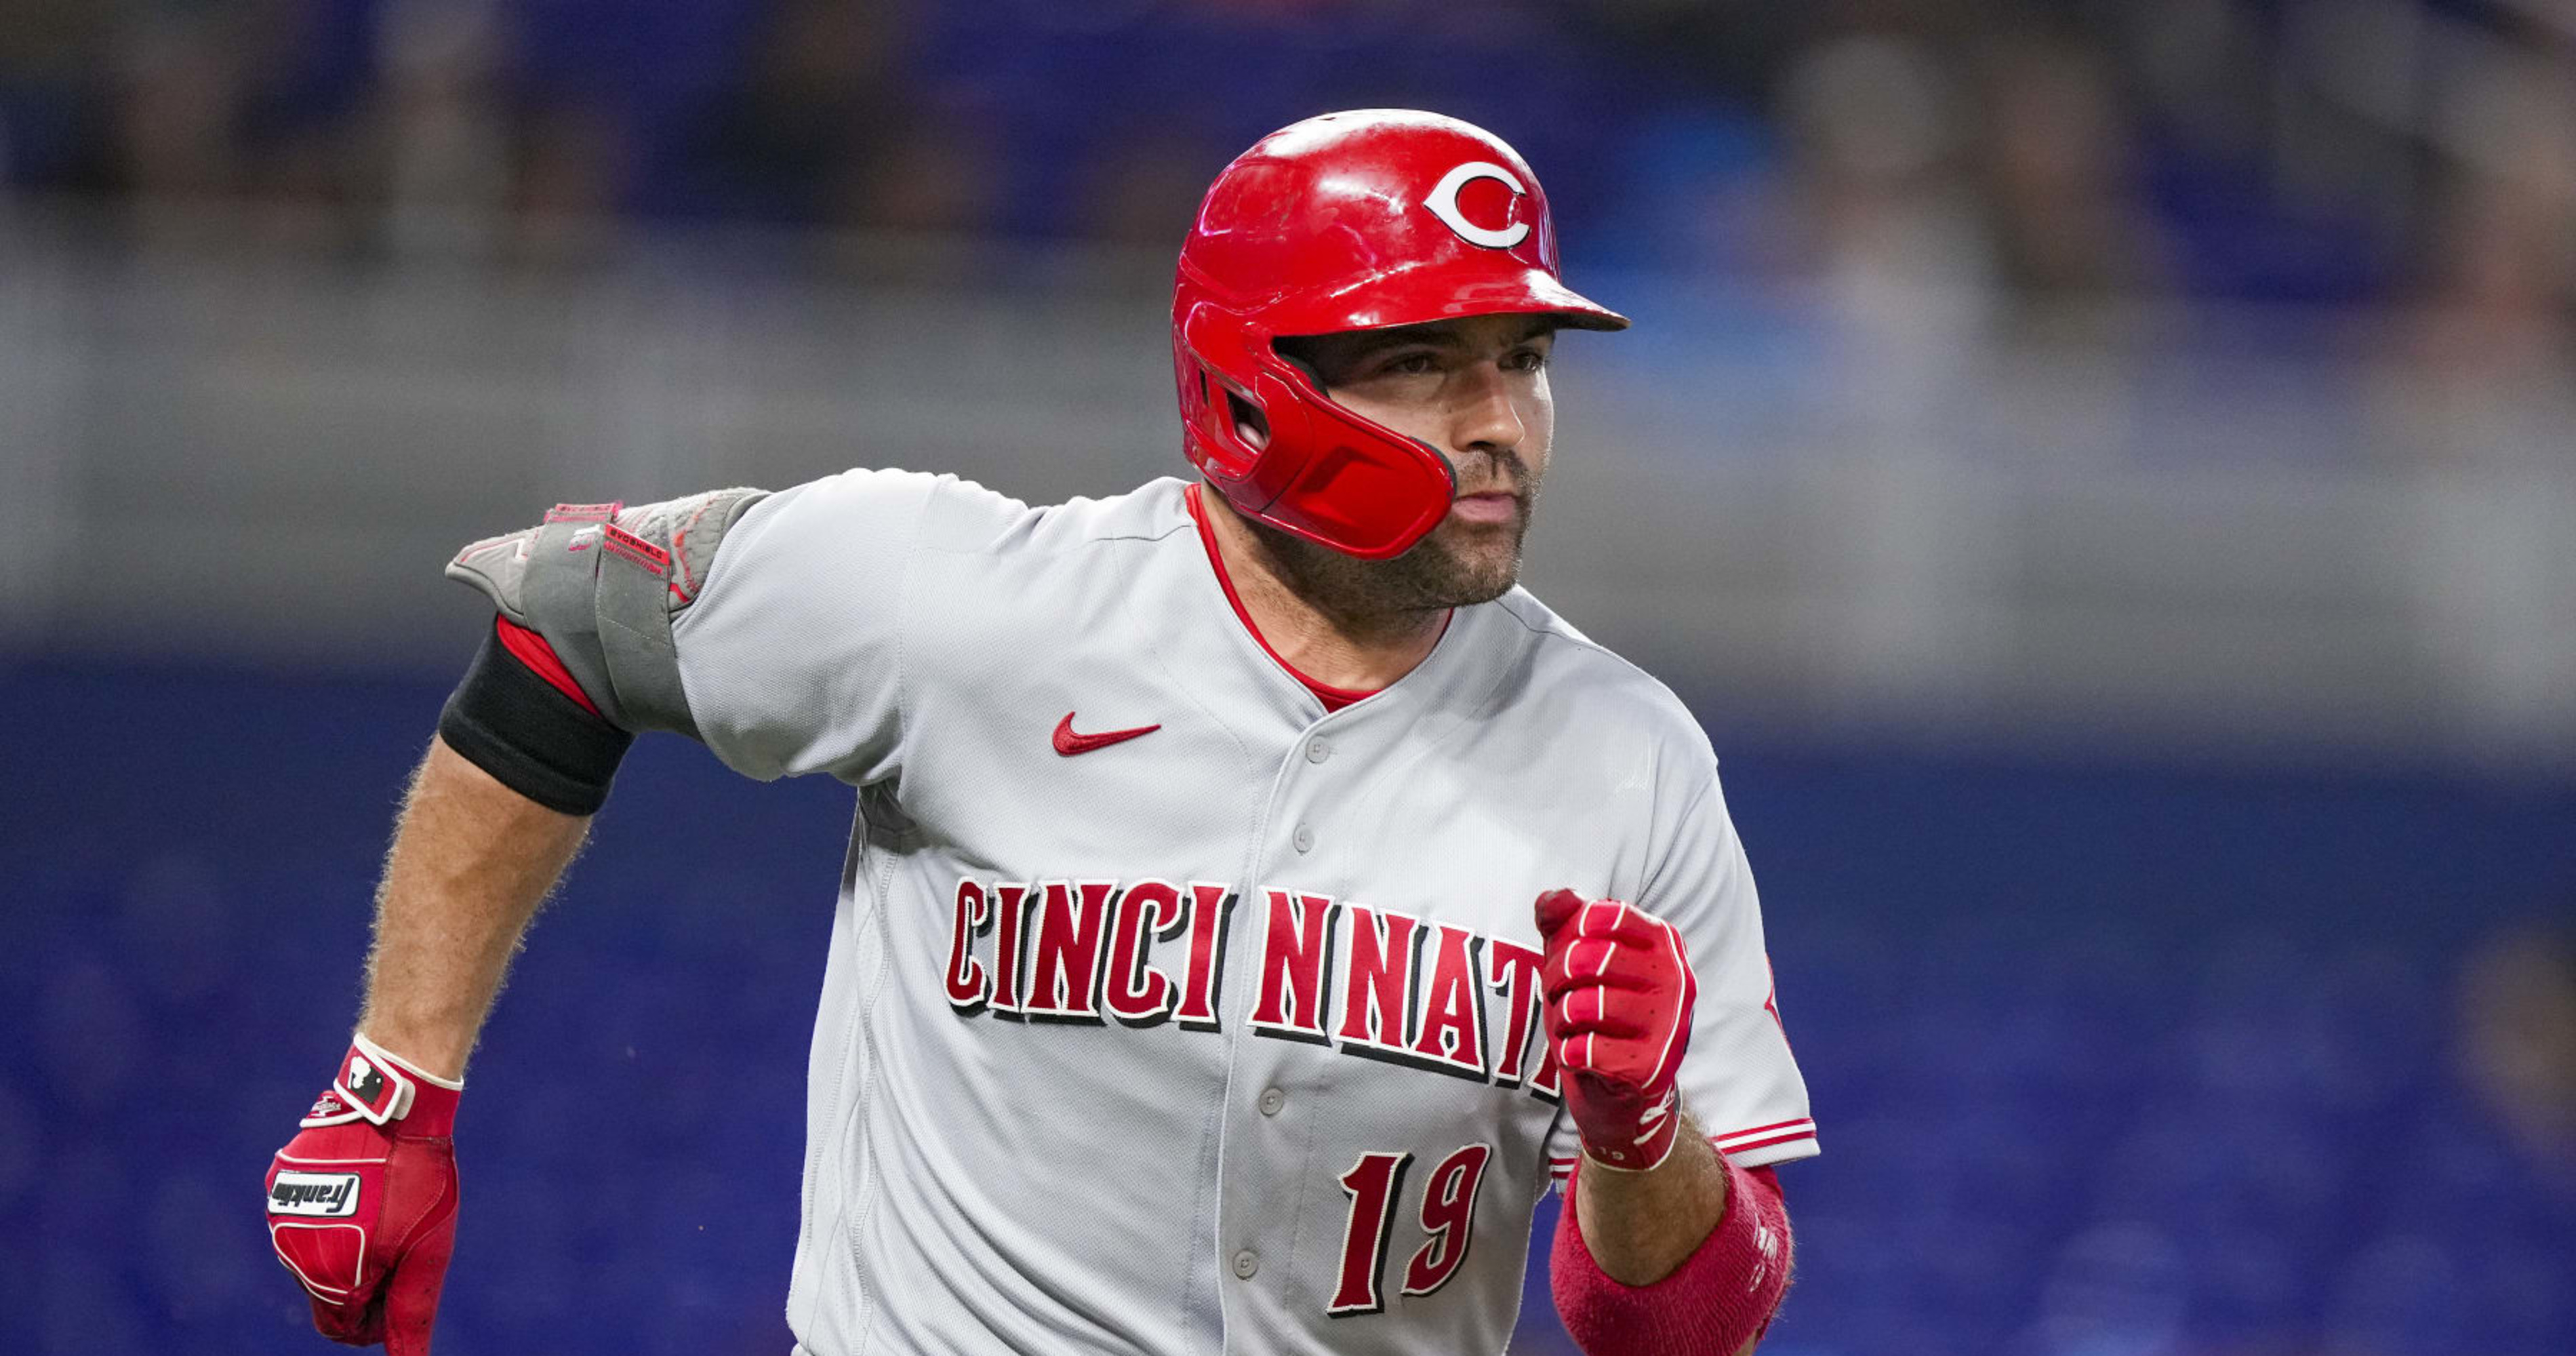 Reds' Joey Votto Shares Excitement of Playing in Field of Dreams Game